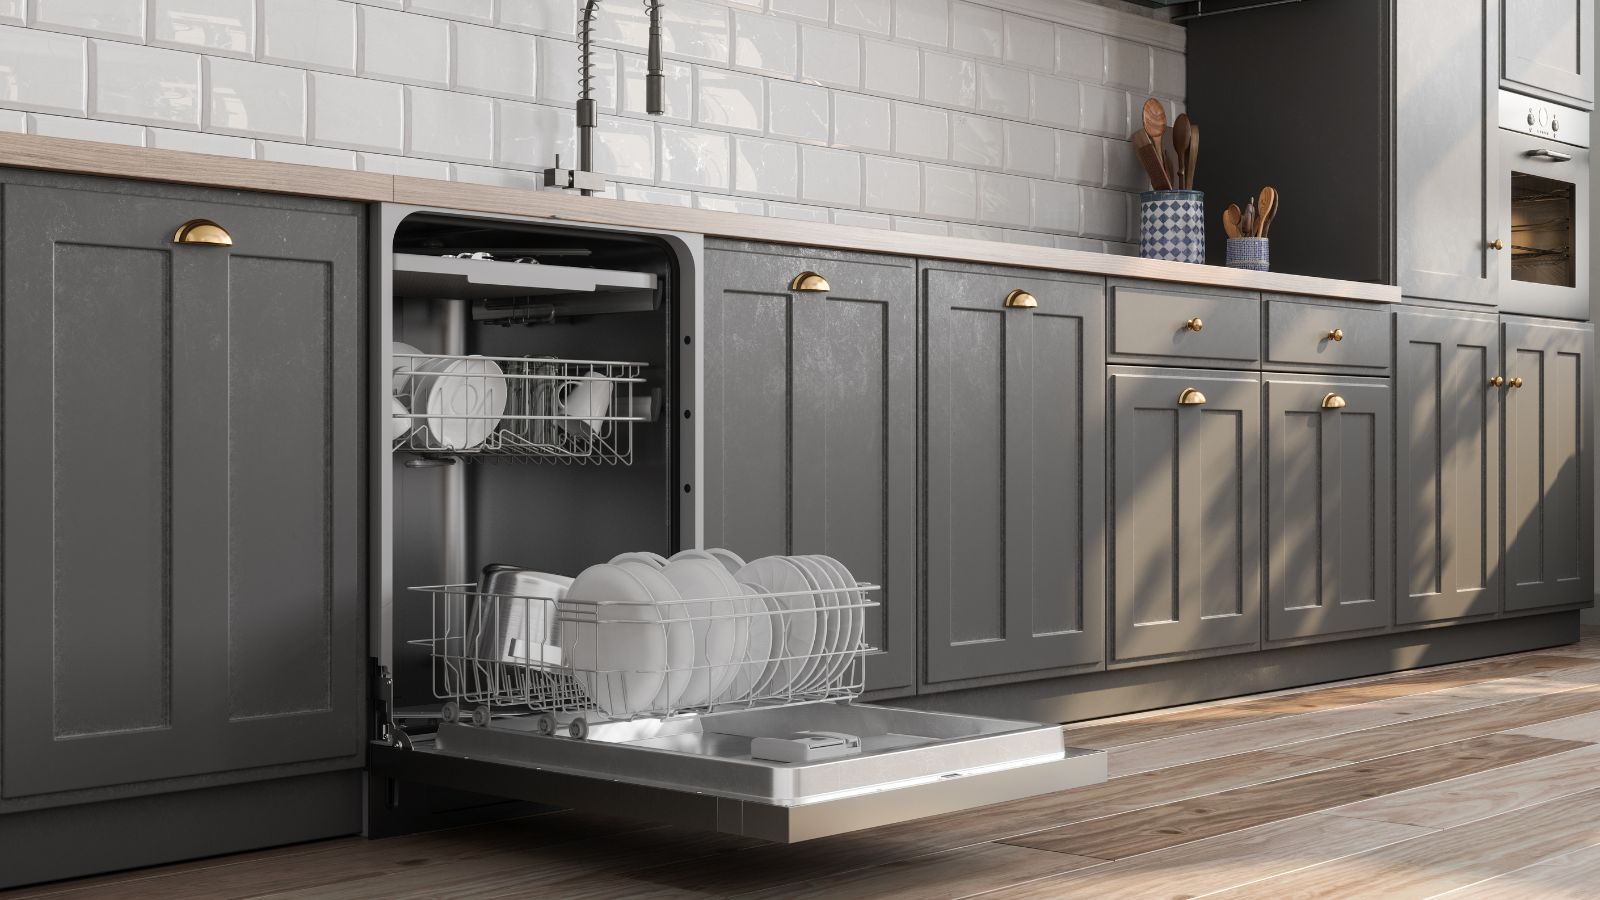 12 Mistakes You May Be Making When Loading Your Dishwasher